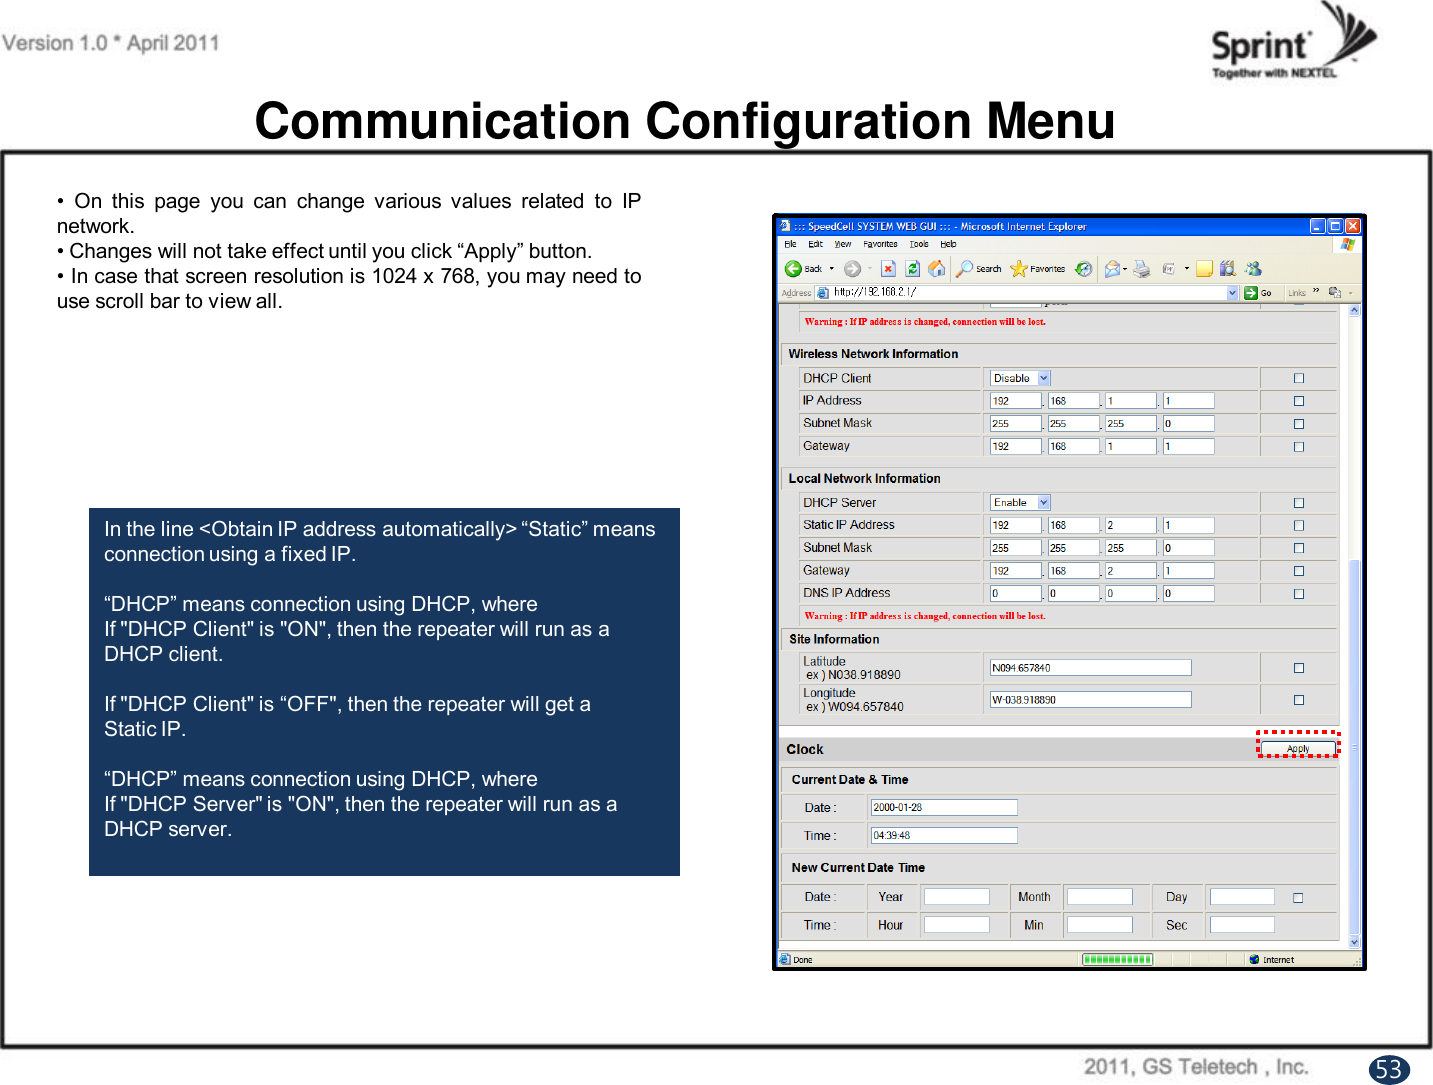 Communication Configuration Menu•On this page you can change various values related to IPnetwork.•Changes will not take effect until you click “Apply” button.•In case that screen resolution is 1024 x768, you may need touse scroll bar to view all.In the line &lt;Obtain IP address automatically&gt; “Static” means connection using a fixed IP.“DHCP” means connection using DHCP, whereIf &quot;DHCP Client&quot; is &quot;ON&quot;, then the repeater will run as aDHCP client.If &quot;DHCP Client&quot; is “OFF&quot;, then the repeater will get aStatic IP.“DHCP” means connection using DHCP, whereIf &quot;DHCP Server&quot; is &quot;ON&quot;, then the repeater will run as aDHCP server.53